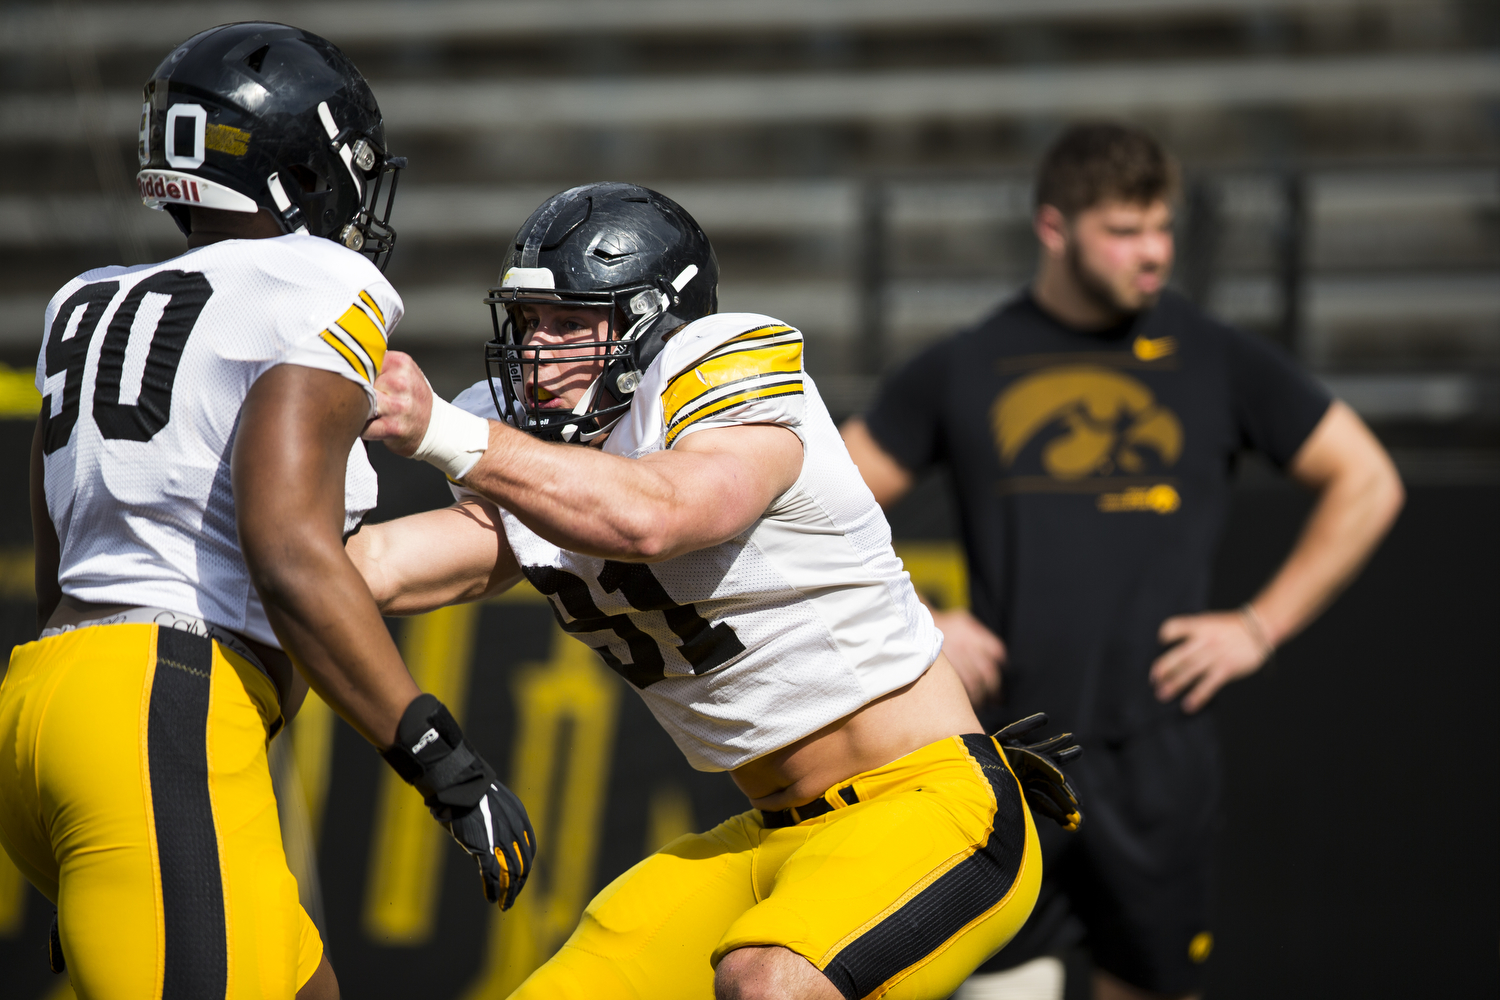 Former Hawkeye LB Jack Campbell's run defense grading out among